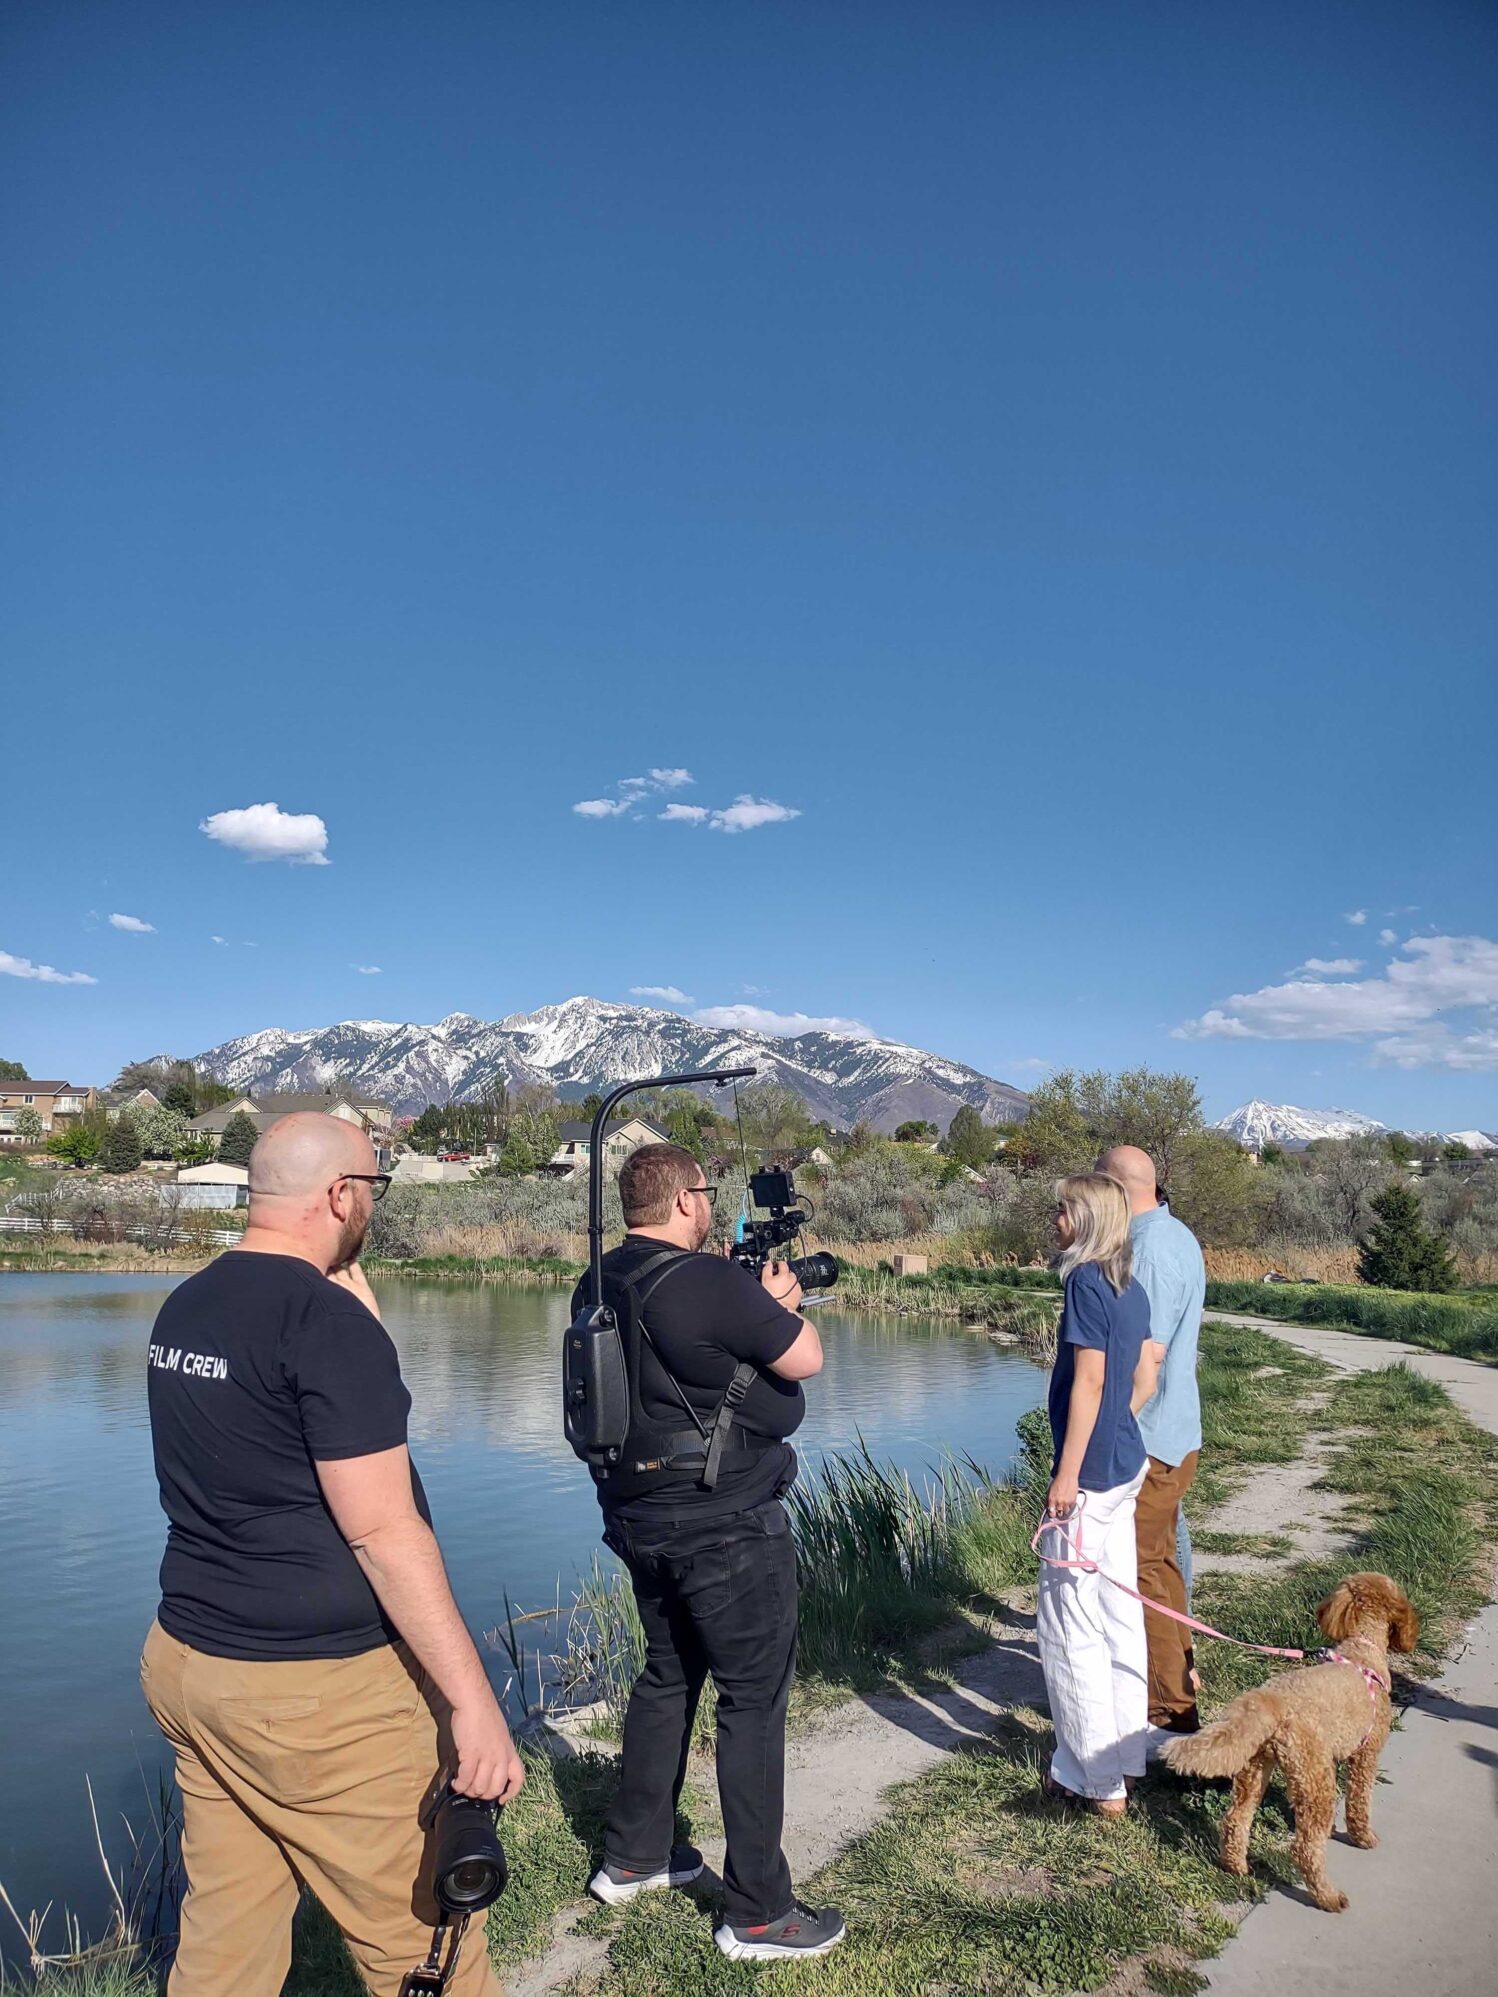 Outdoor shot of a film crew member filming a couple walking their dog by a pond, with the film crew's assistant looking on and mountains in the backdrop.